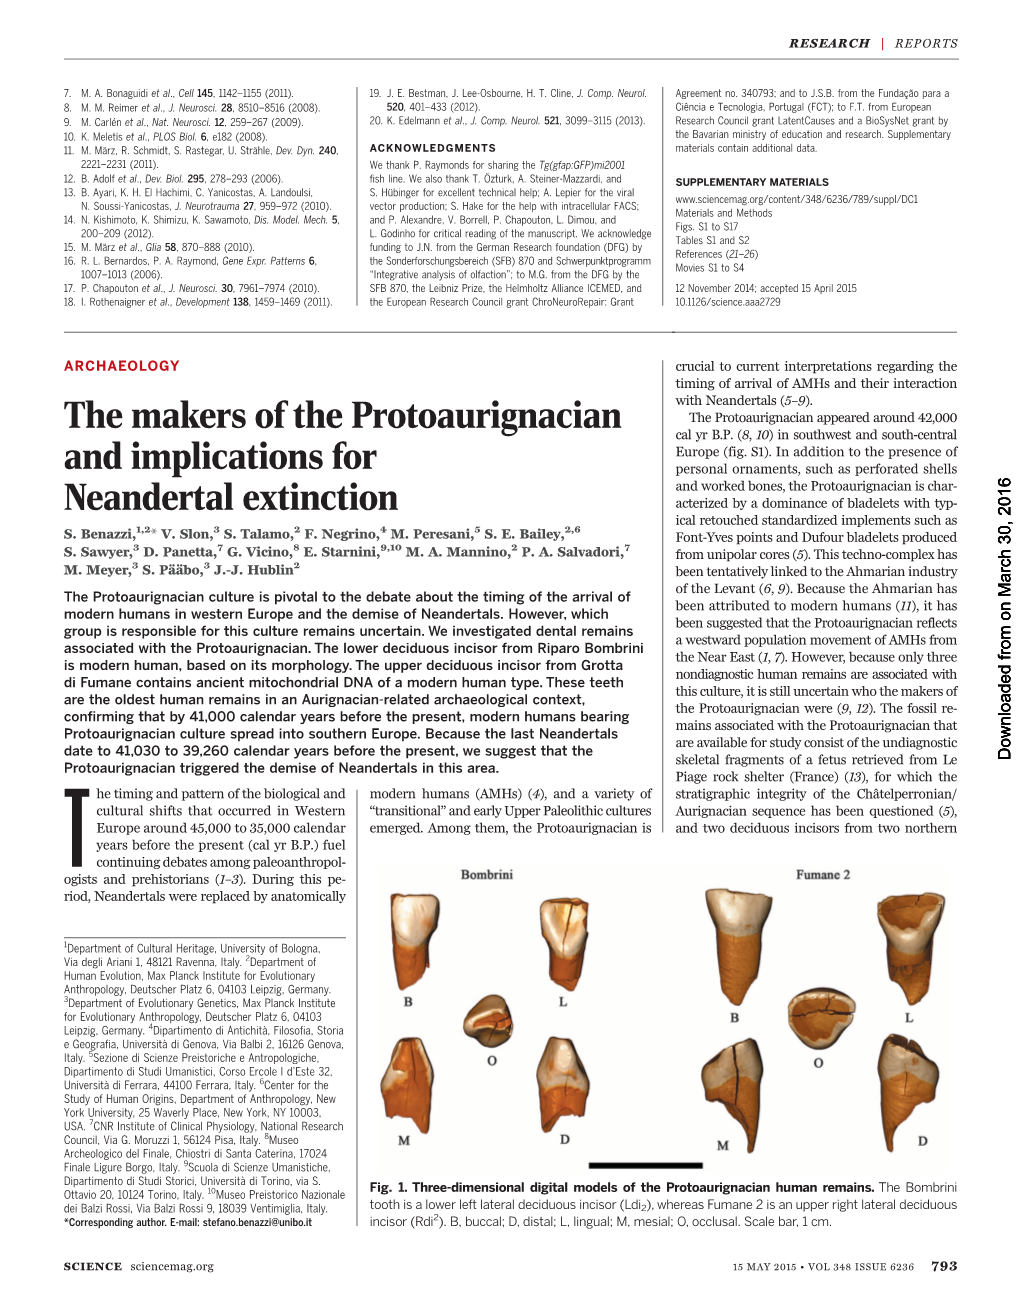 The Makers of the Protoaurignacian and Implications for Neandertal Extinction S